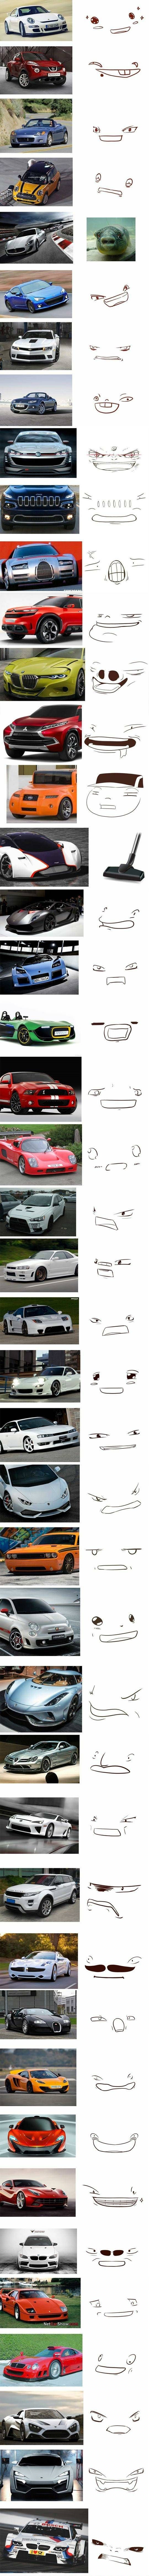 If cars had faces